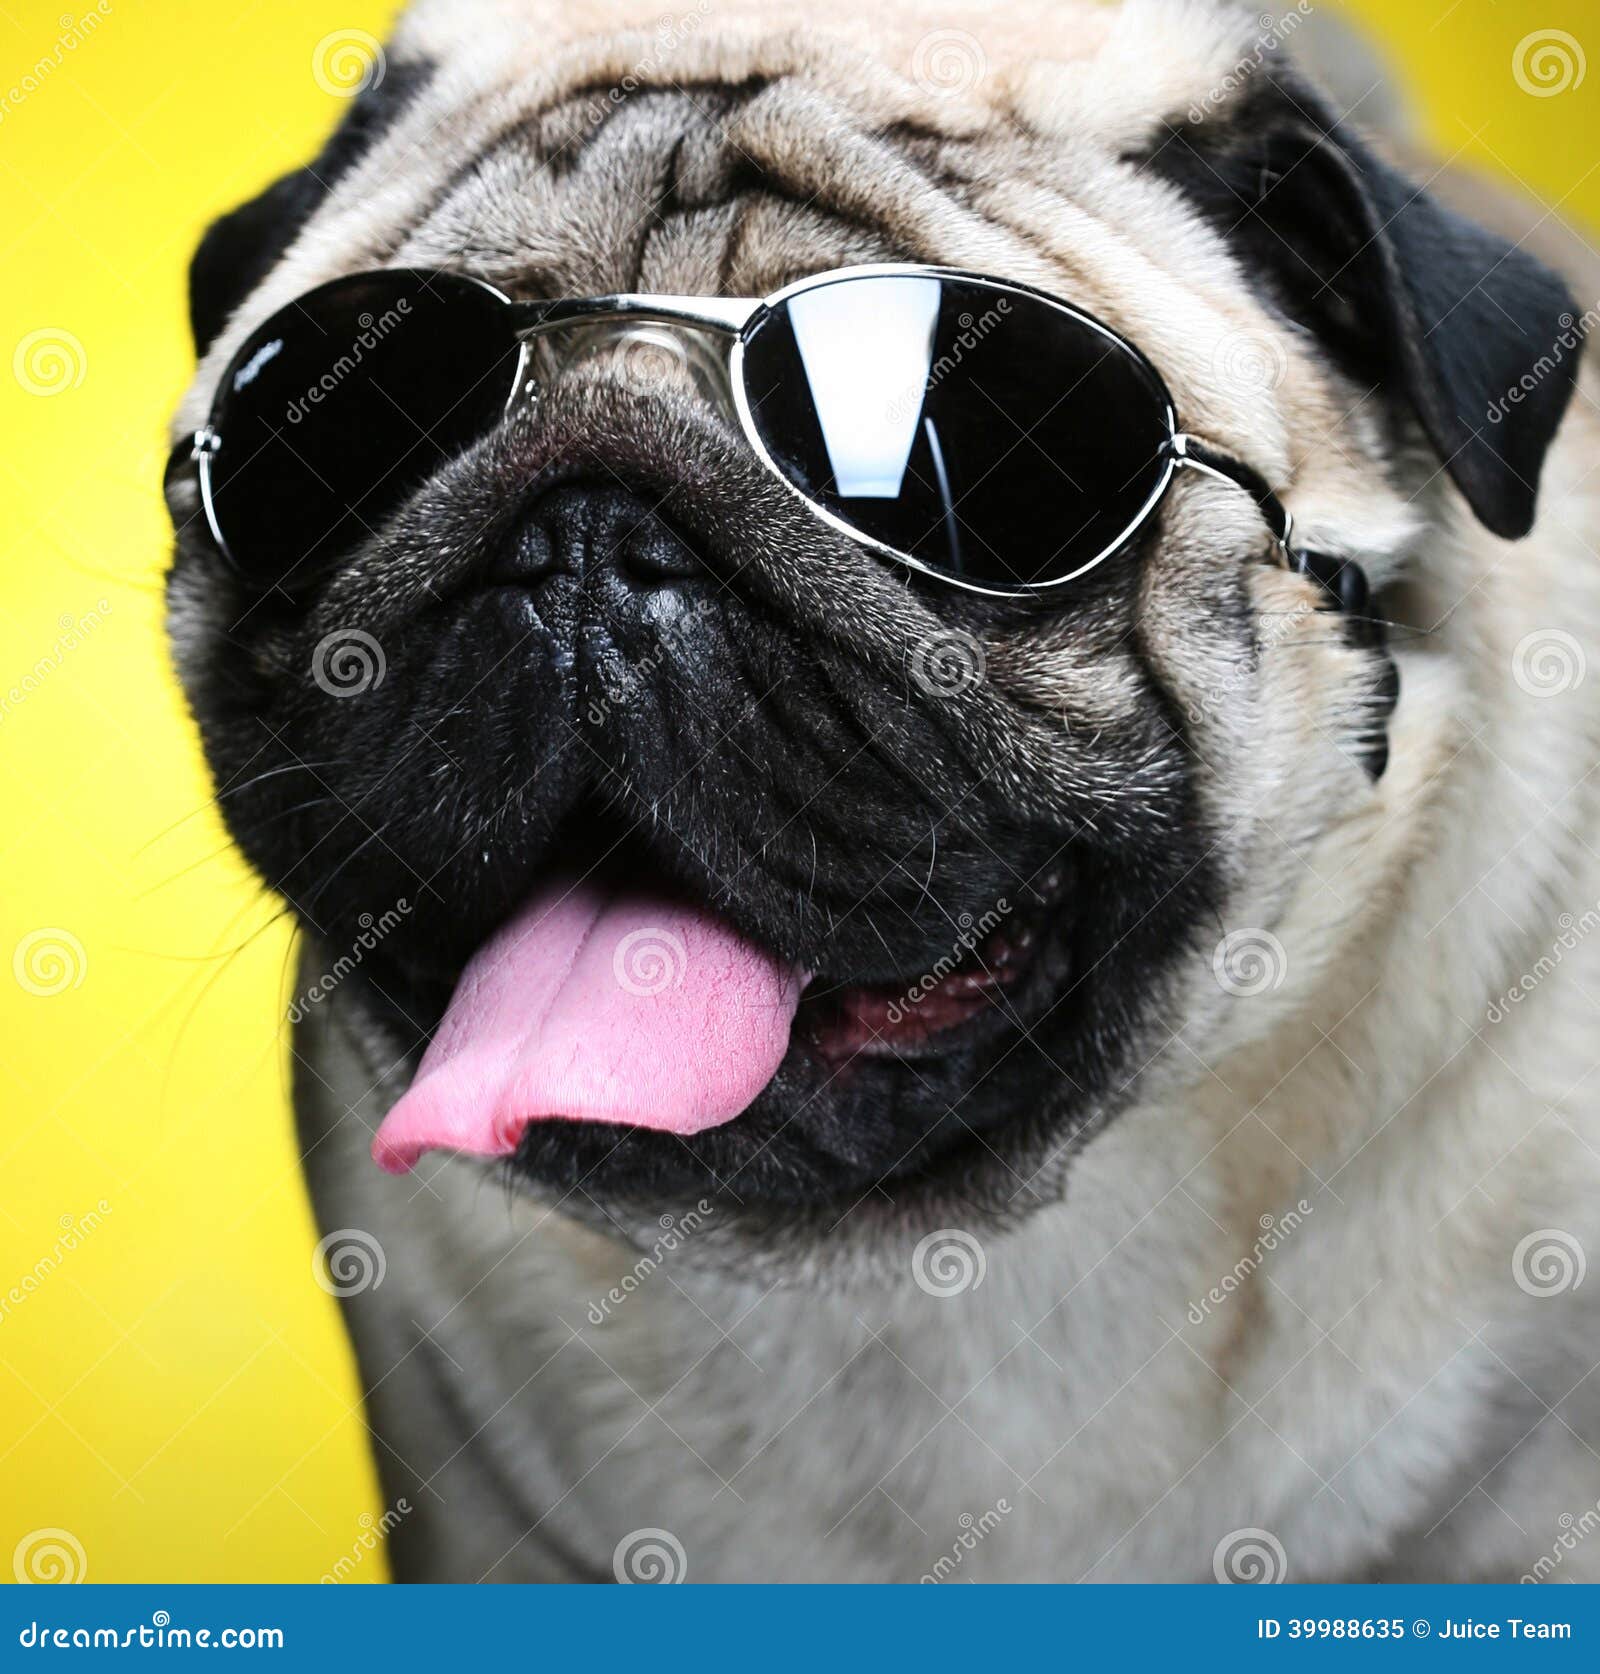 Pug with sunglasses. stock image. Image of funny, black - 39988635